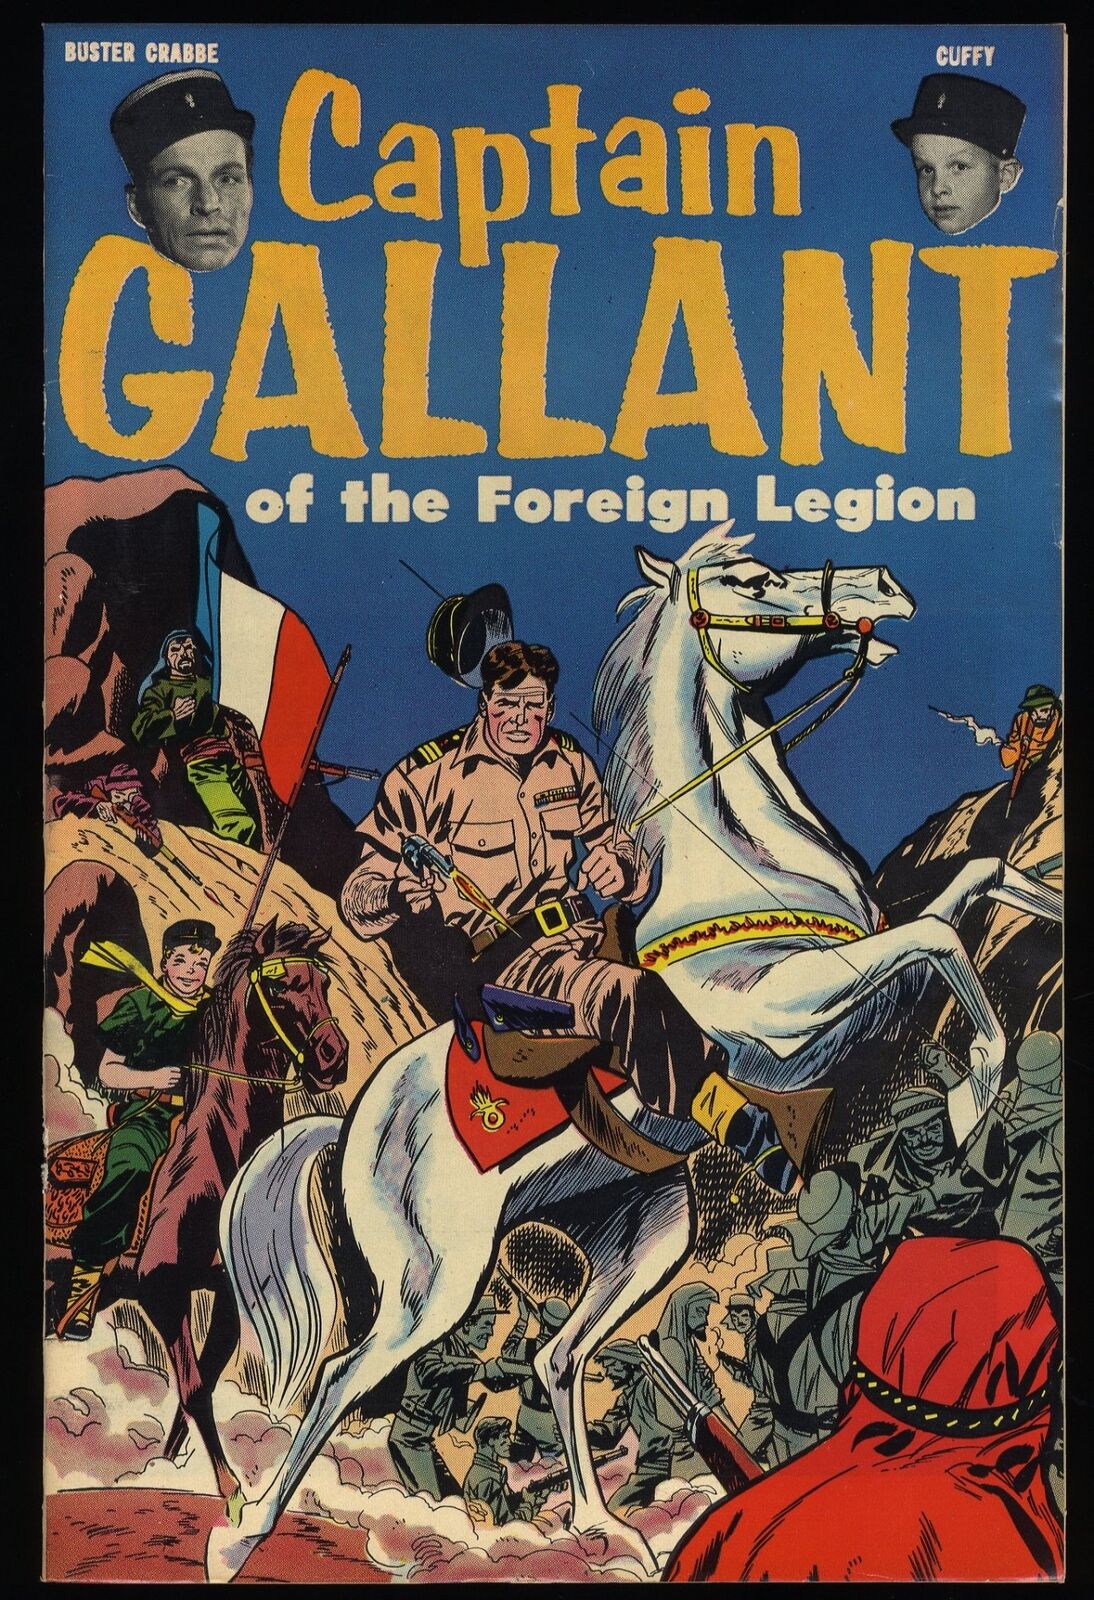 Captain Gallant of the Foreign Legion (1955) #1 VF- 7.5 Based on TV Series 